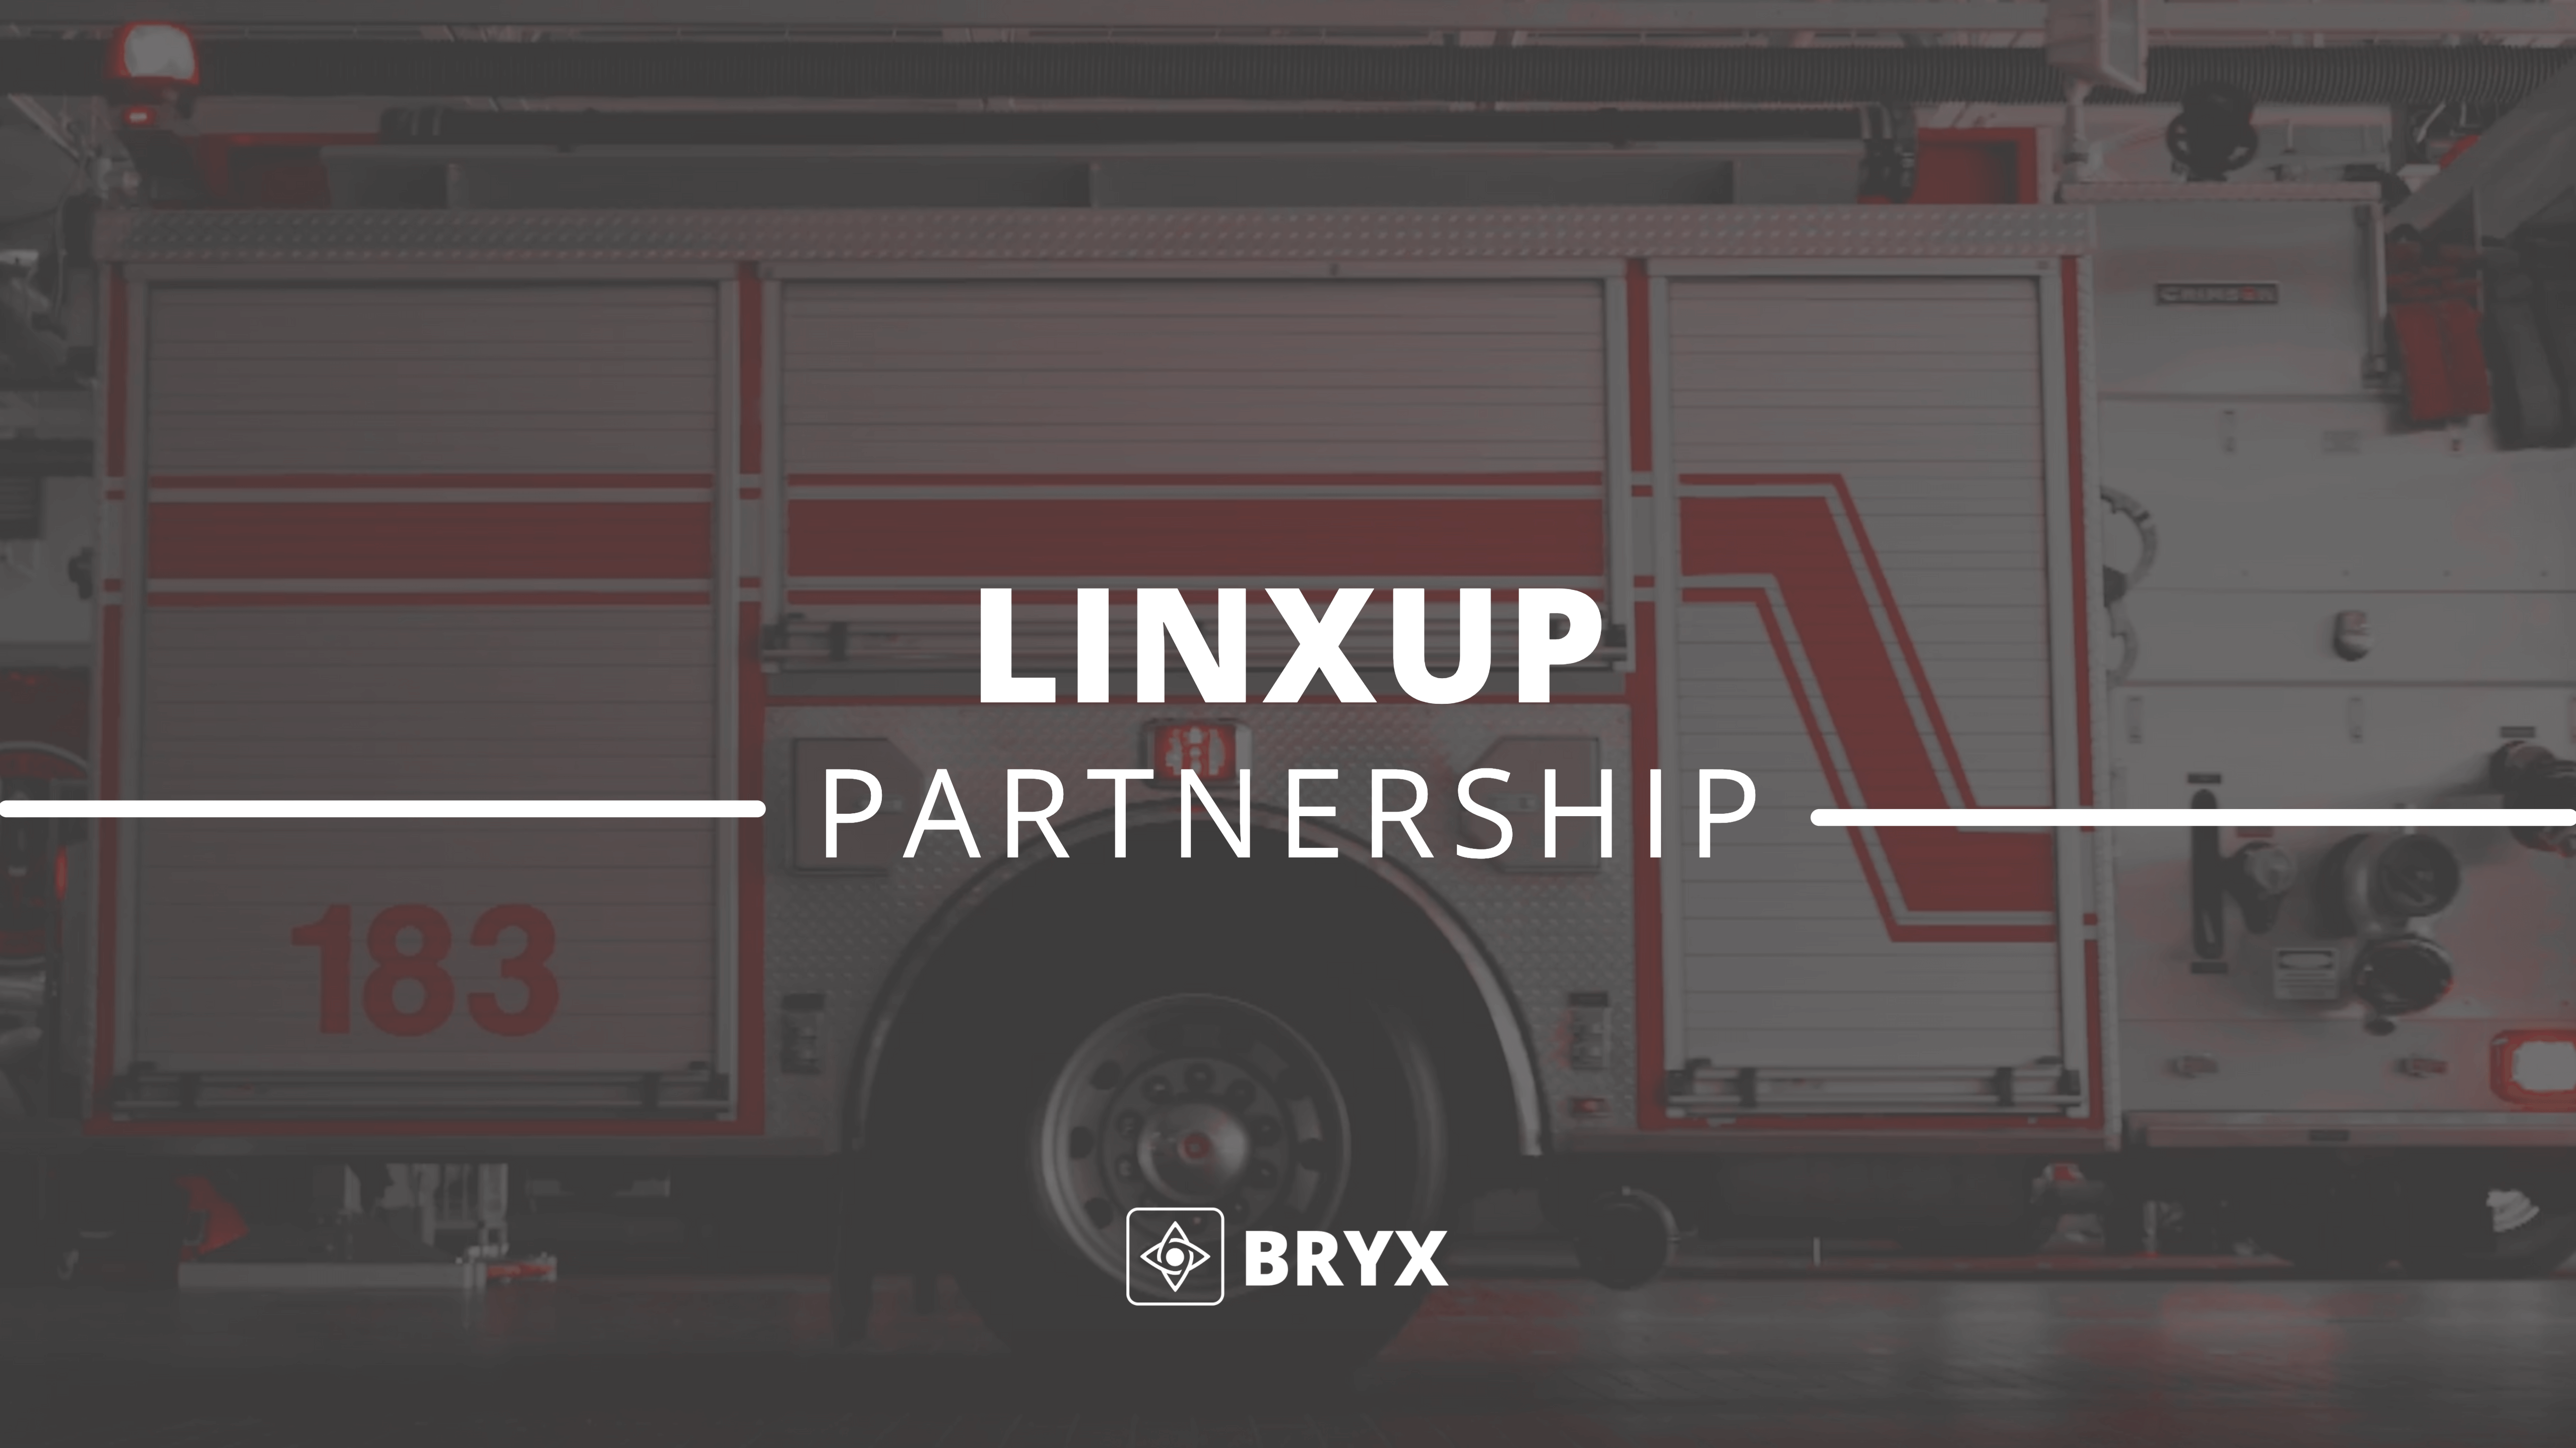 Read full post: Bryx Partners with Linxup for Reliable, Integrated Apparatus Tracking Solutions